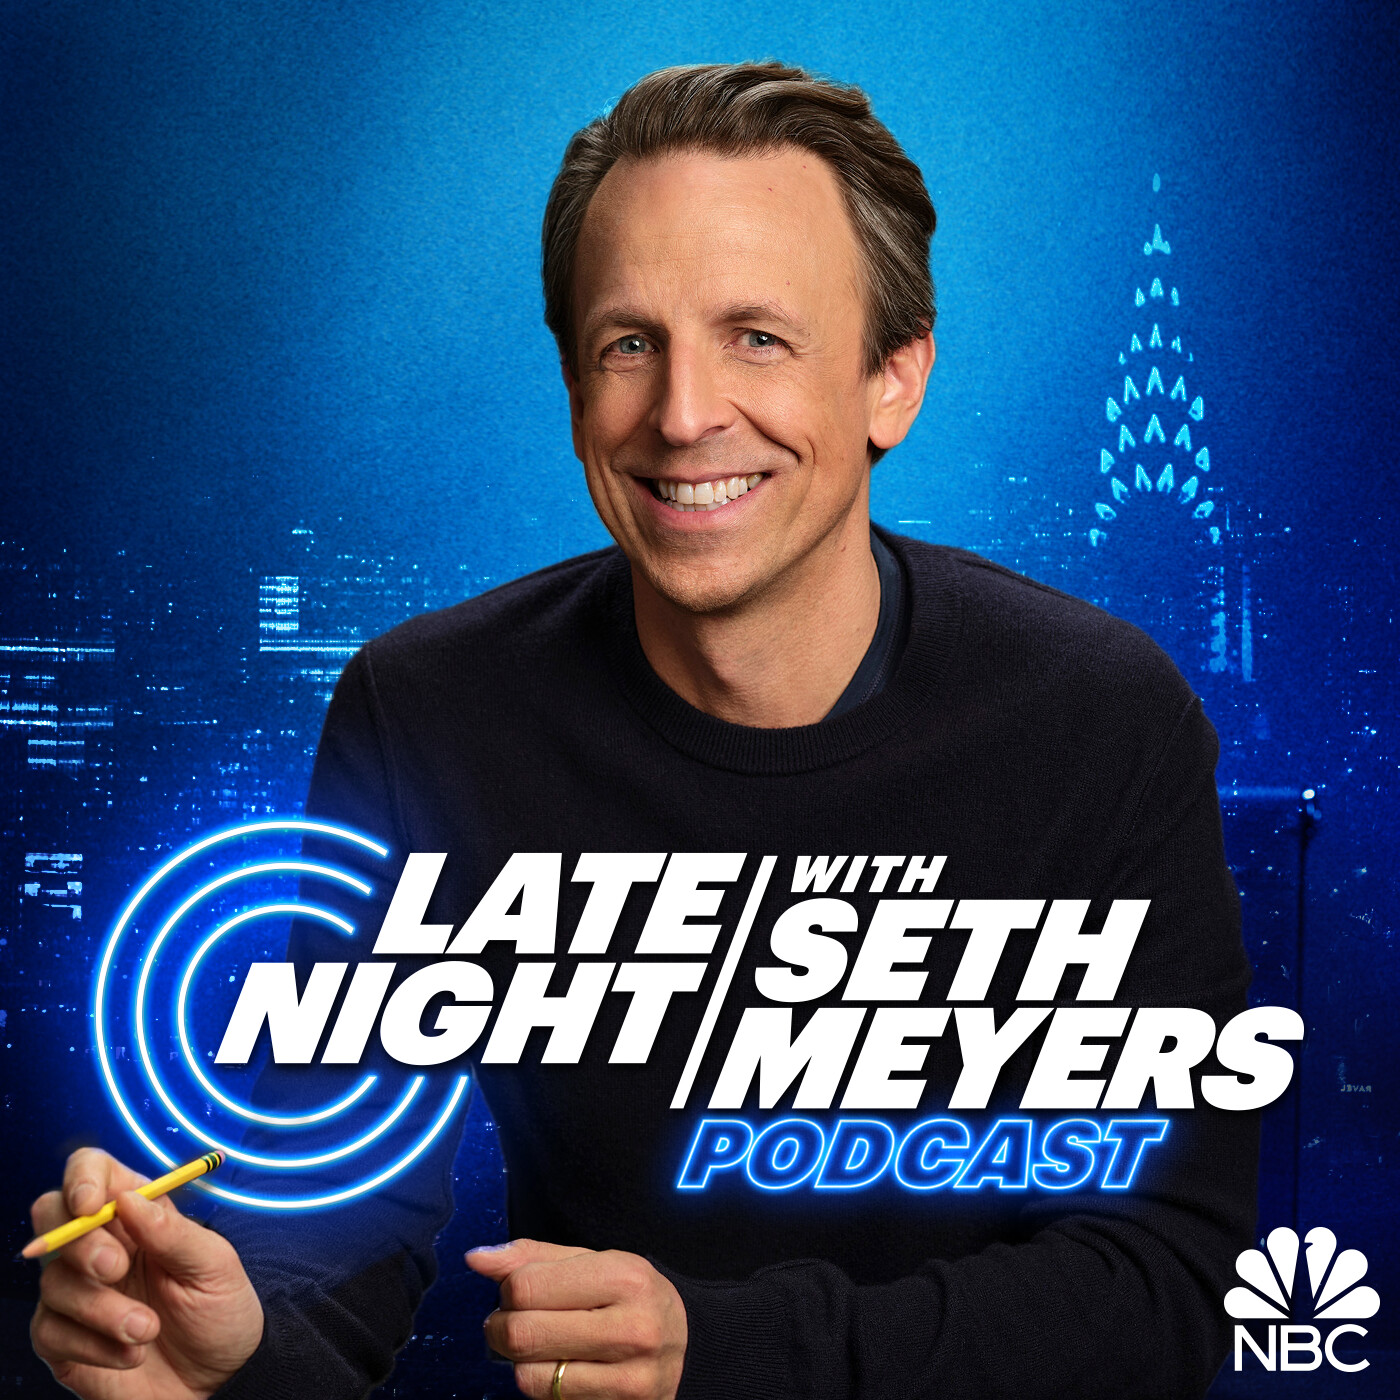 Late Night with Seth Meyers Podcast podcast show image